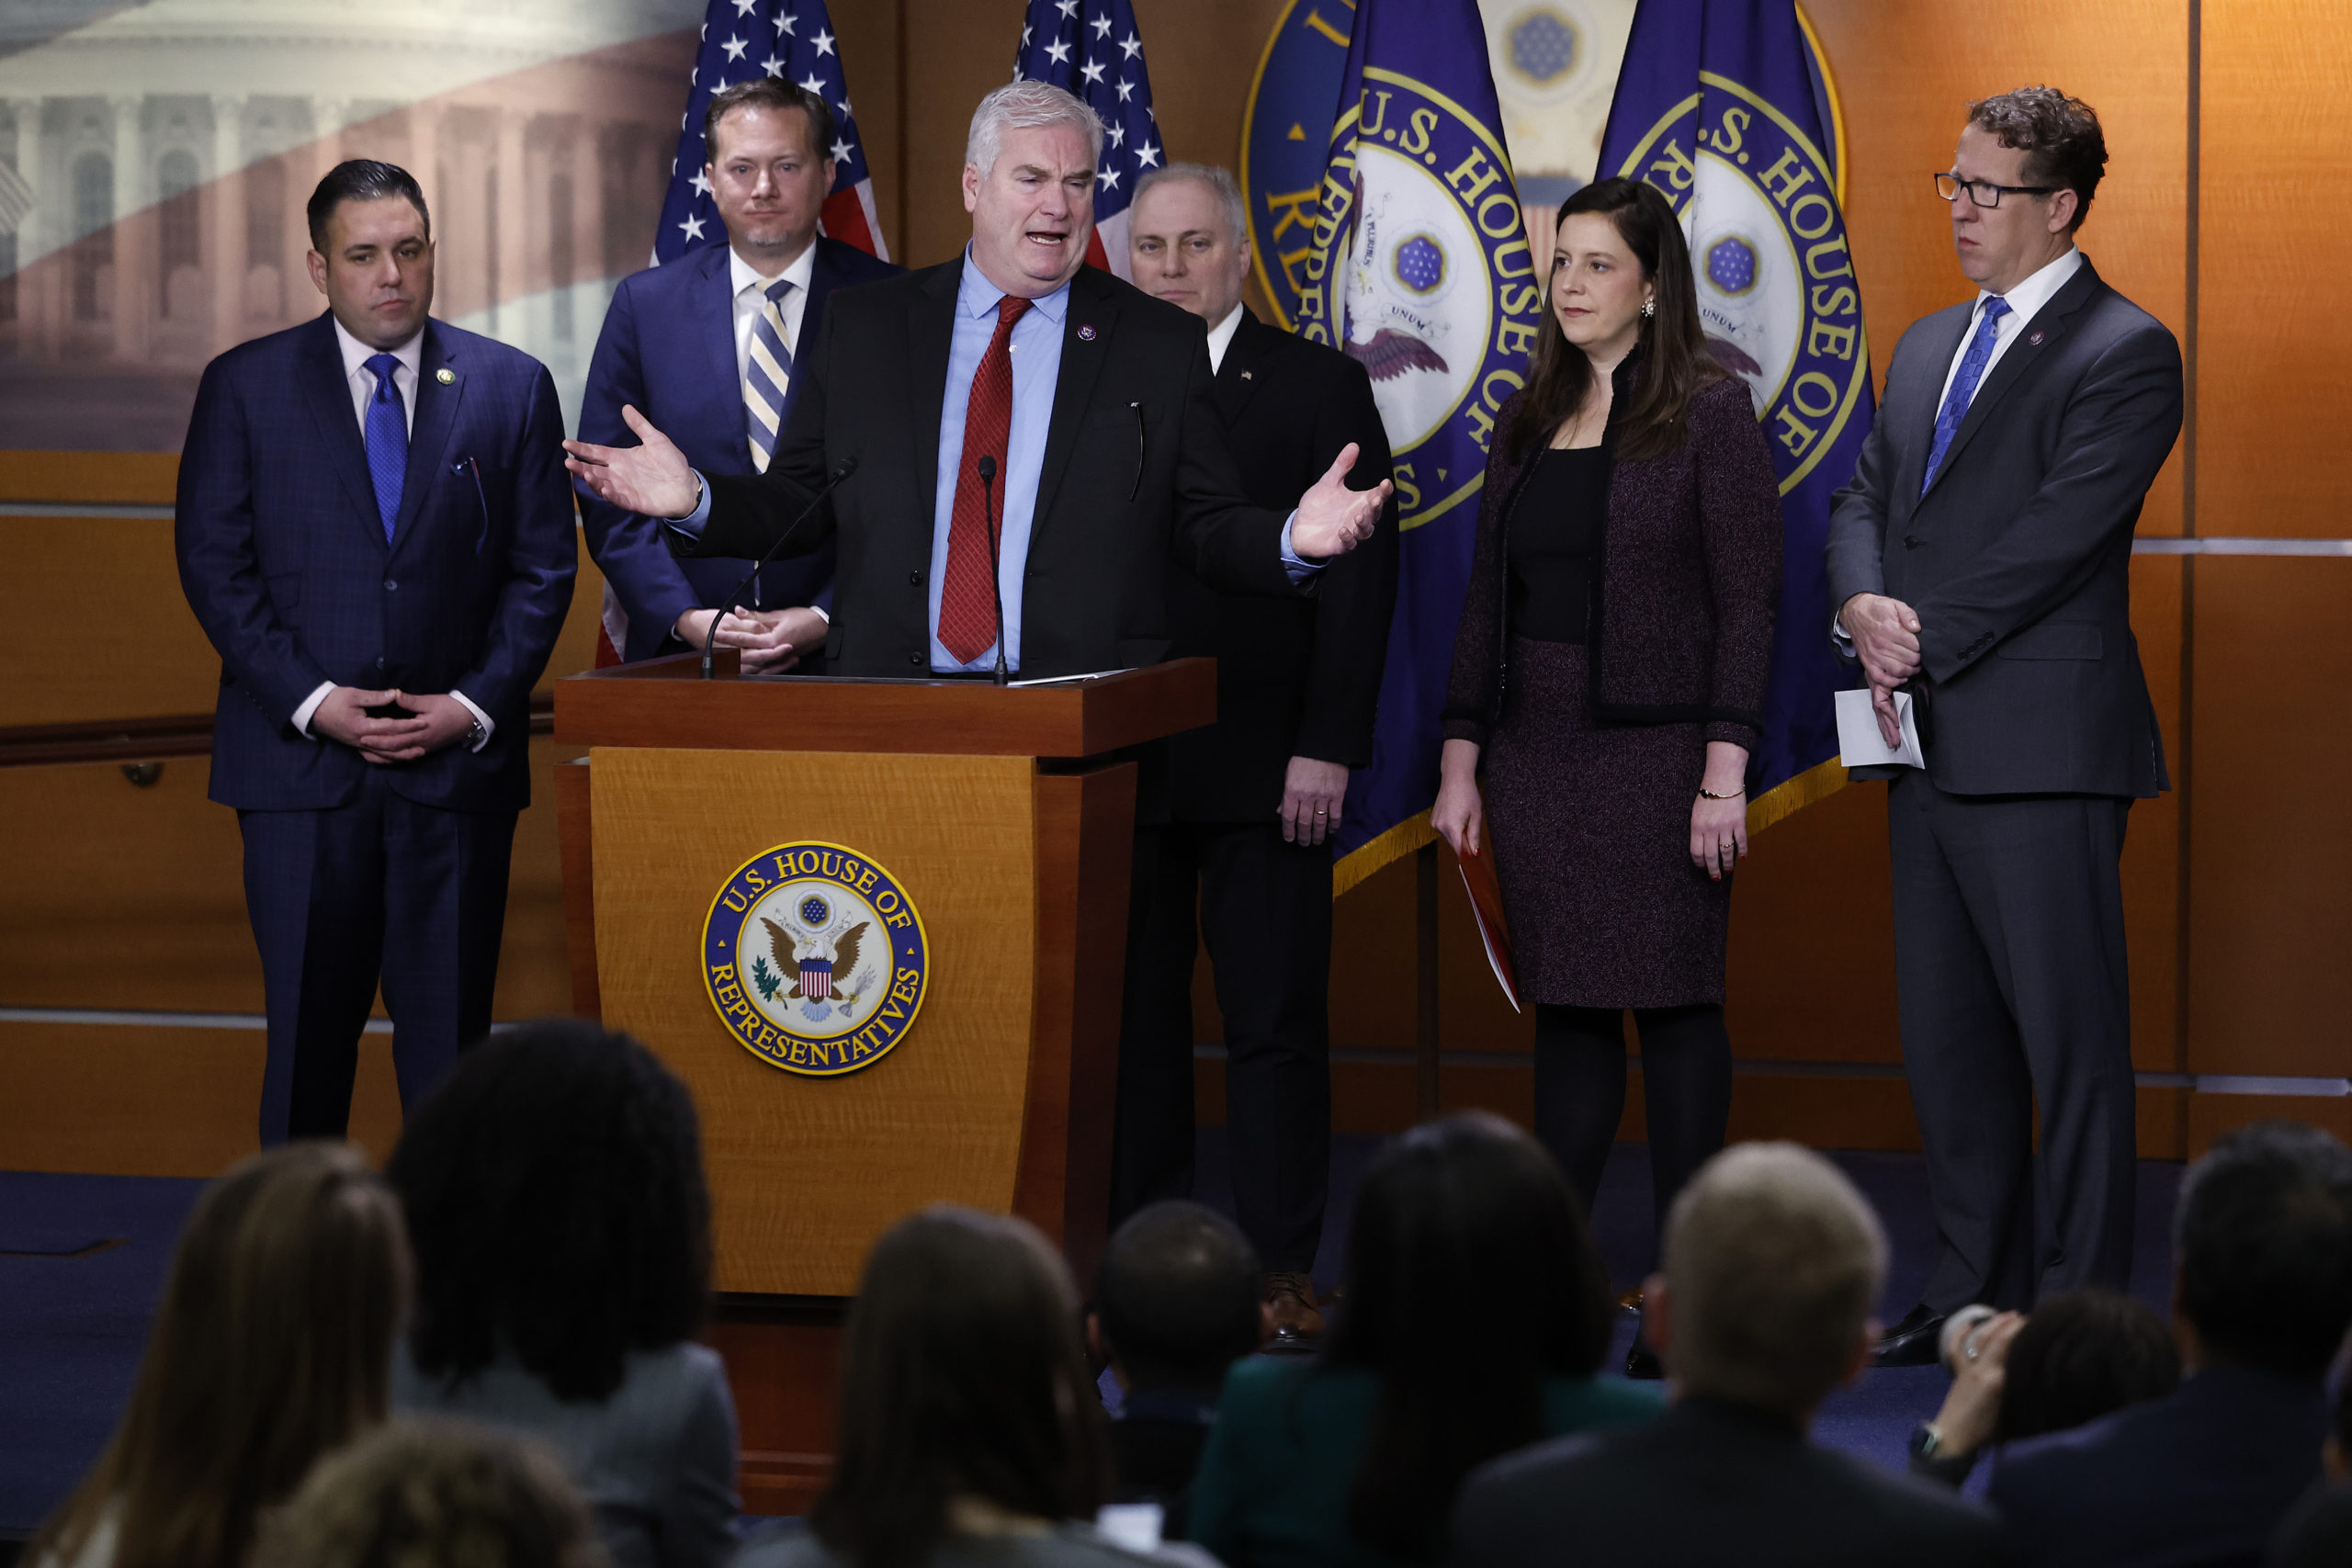 WASHINGTON, DC - JANUARY 10: House Majority Whip Tom Emmer (R-MN) (3rd L) talks during a news conference with (L-R) Rep. Anthony D'Esposito (R-NY), Rep. Michael Cloud (R-LA), House Majority Leader Steve Scalise (R-LA), House Republican Conference Chair Elise Stefanik (R-NY) and Rep. Adrian Smith (R-NE) for a news conference following a GOP caucus meeting at the U.S. Capitol on January 10, 2023 in Washington, DC. House Republicans passed their first bill of the 118th Congress on Monday night, voting along party lines to cut $71 billion from the Internal Revenue Service, which Senate Democrats said they would not take up. (Photo by Chip Somodevilla/Getty Images)